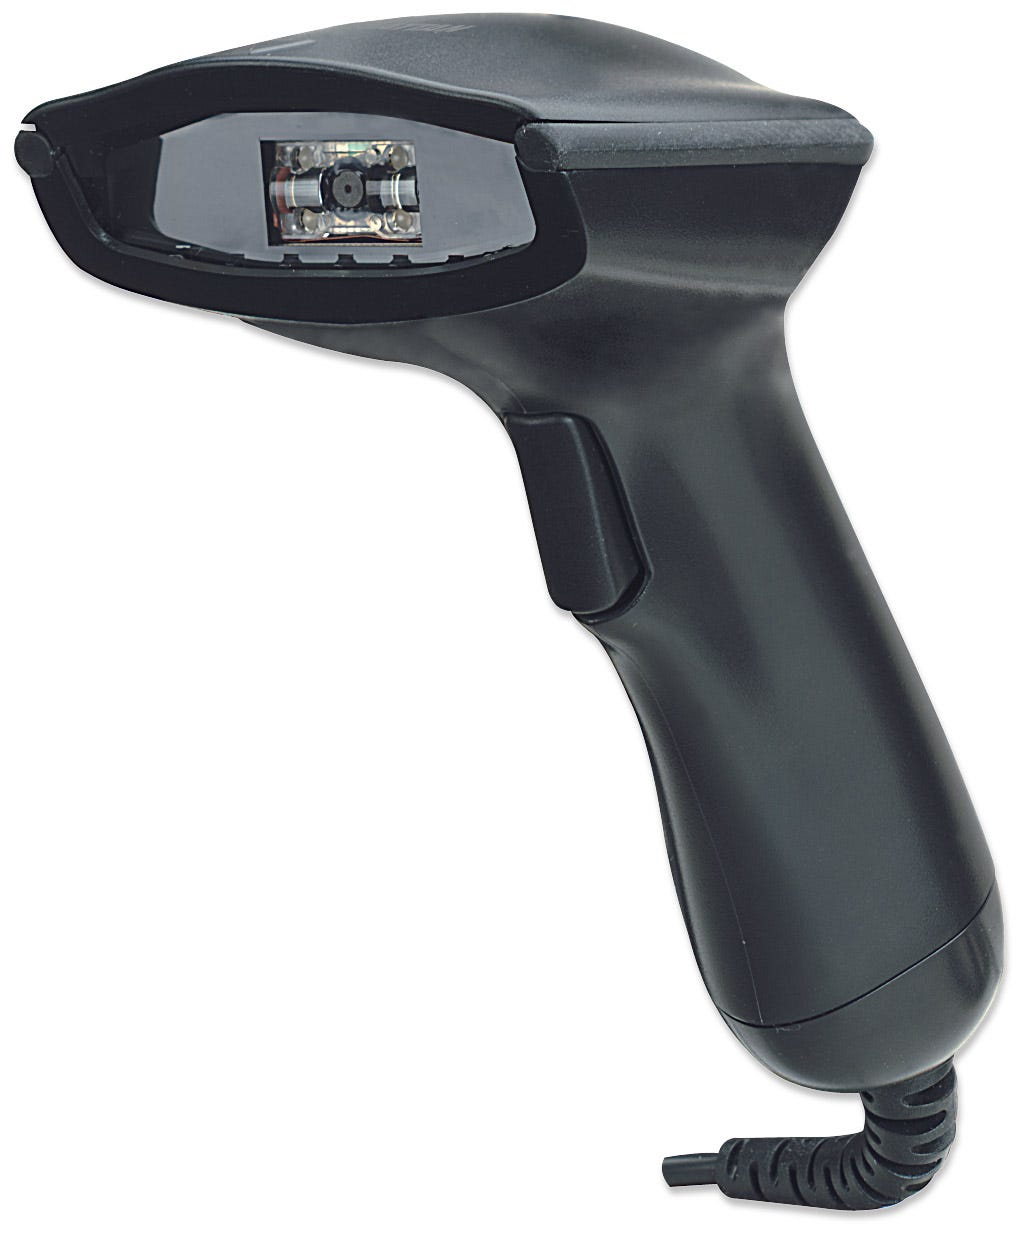 Manhattan 2D Handheld Barcode Scanner, USB, 430mm Scan Depth, Cable 1.5m, Max Ambient Light 100,000 lux (sunlight), Black, Box